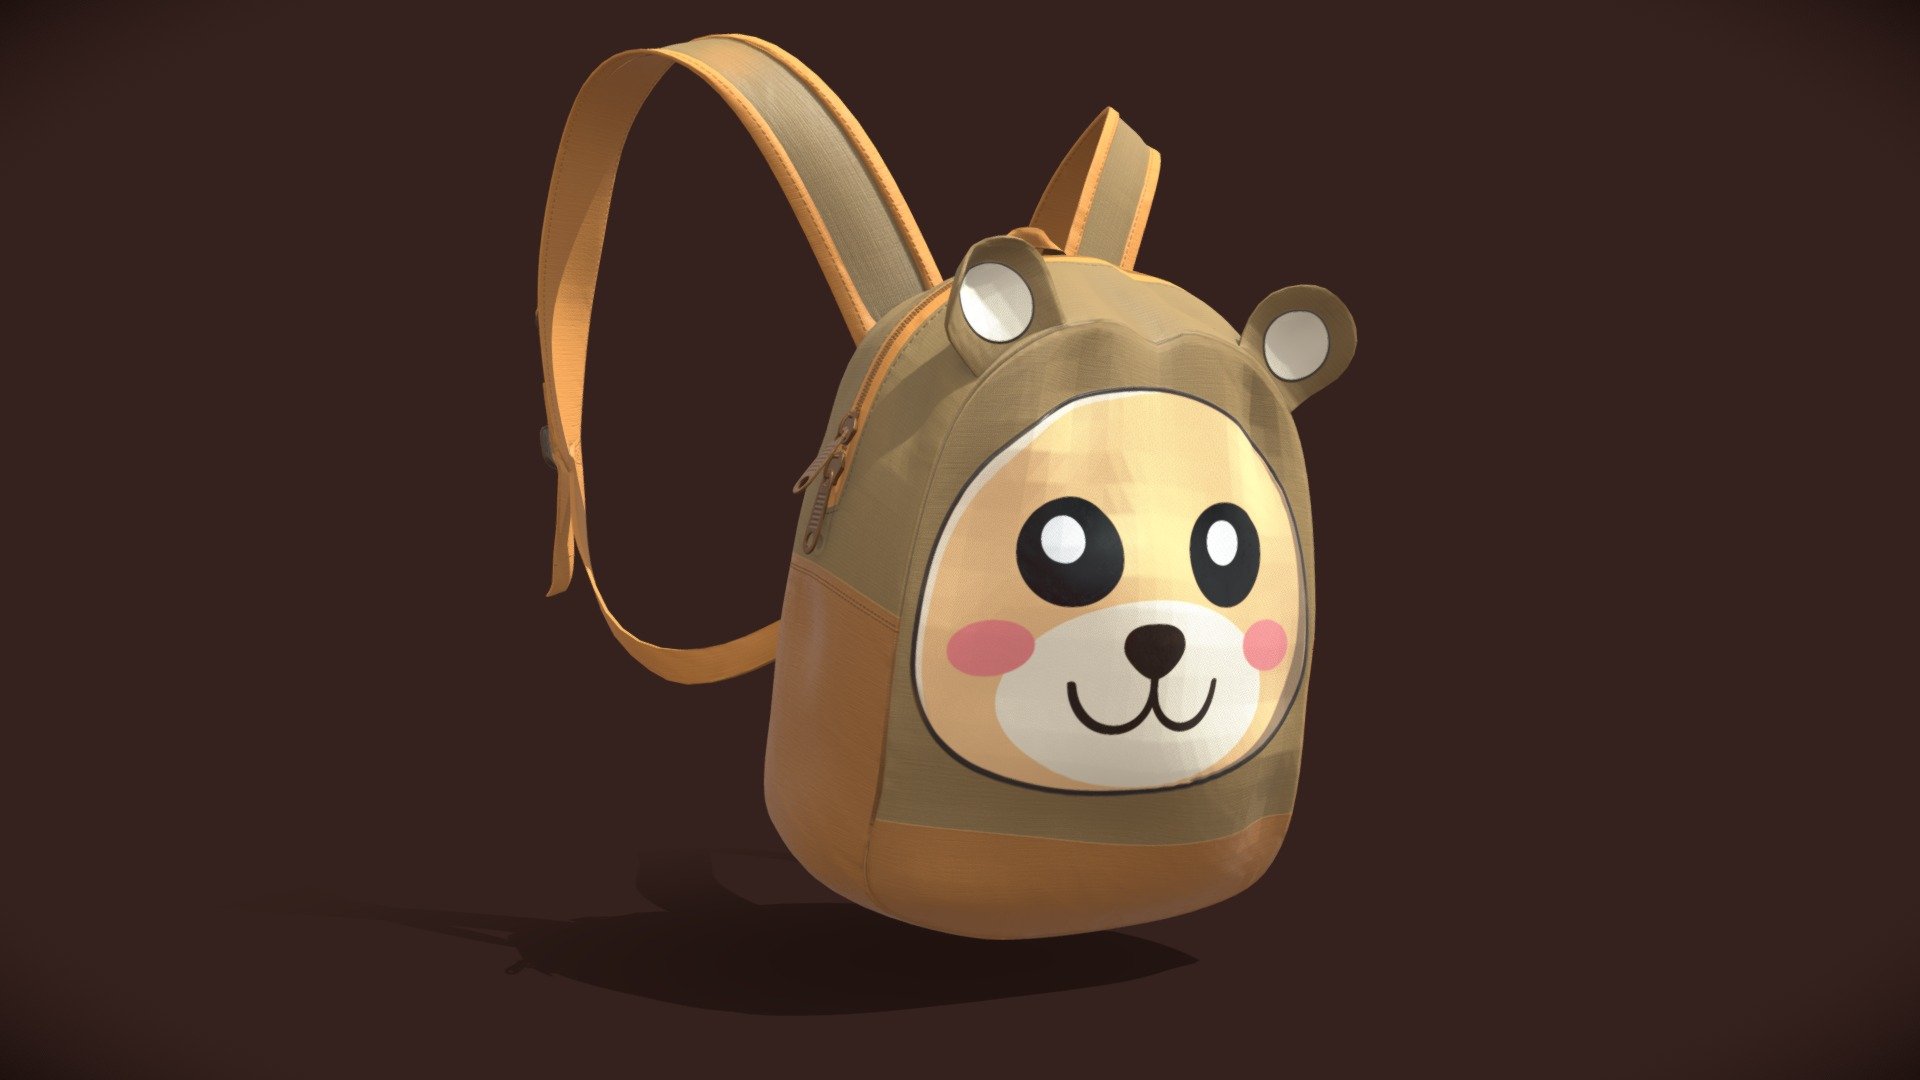 Kid backpack.

Hey ya'll here’s a new asset I created. 
I used Maya for the modelling part and Substance Painter for the textures 3d model